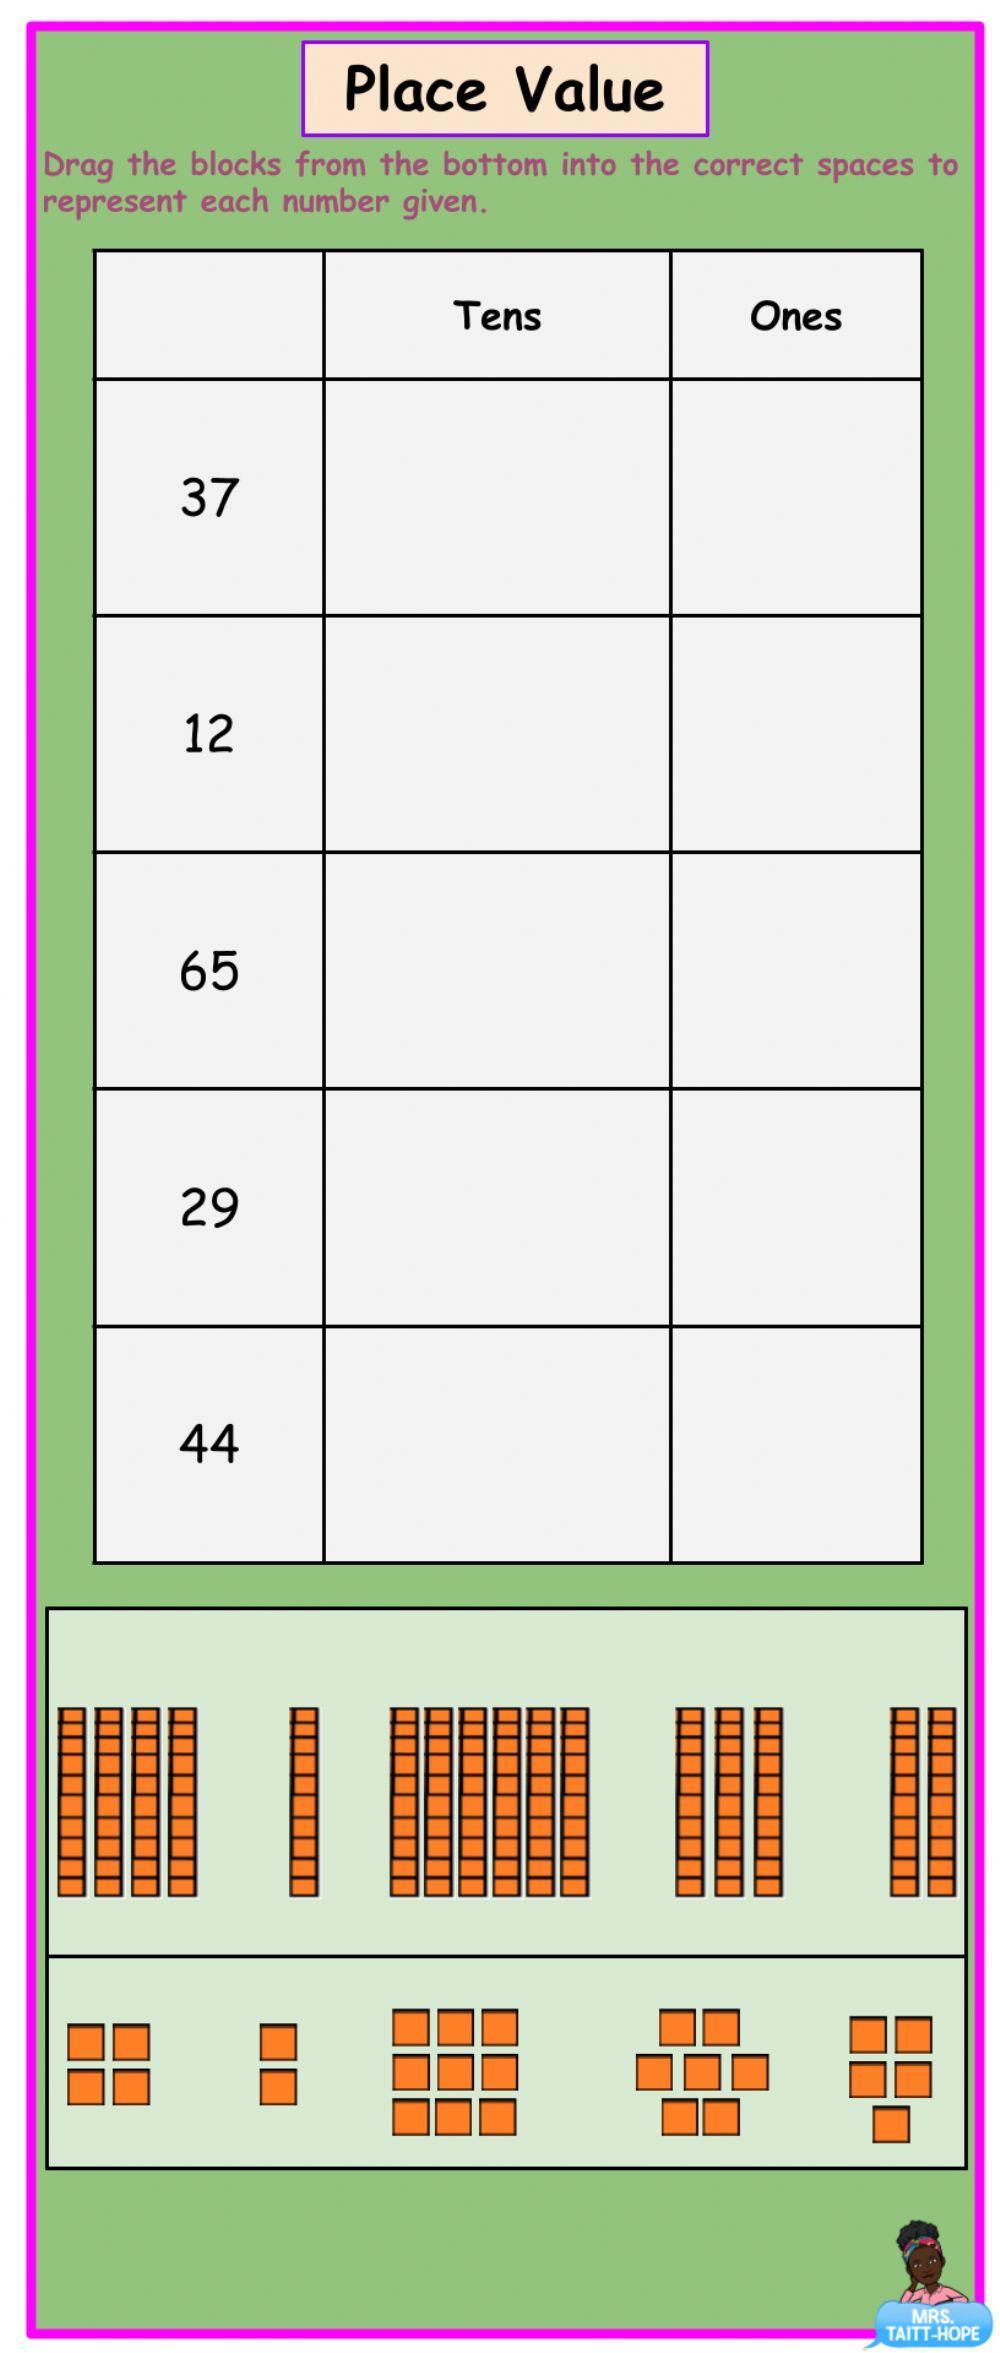 Place Value with Base 10 Blocks - 1